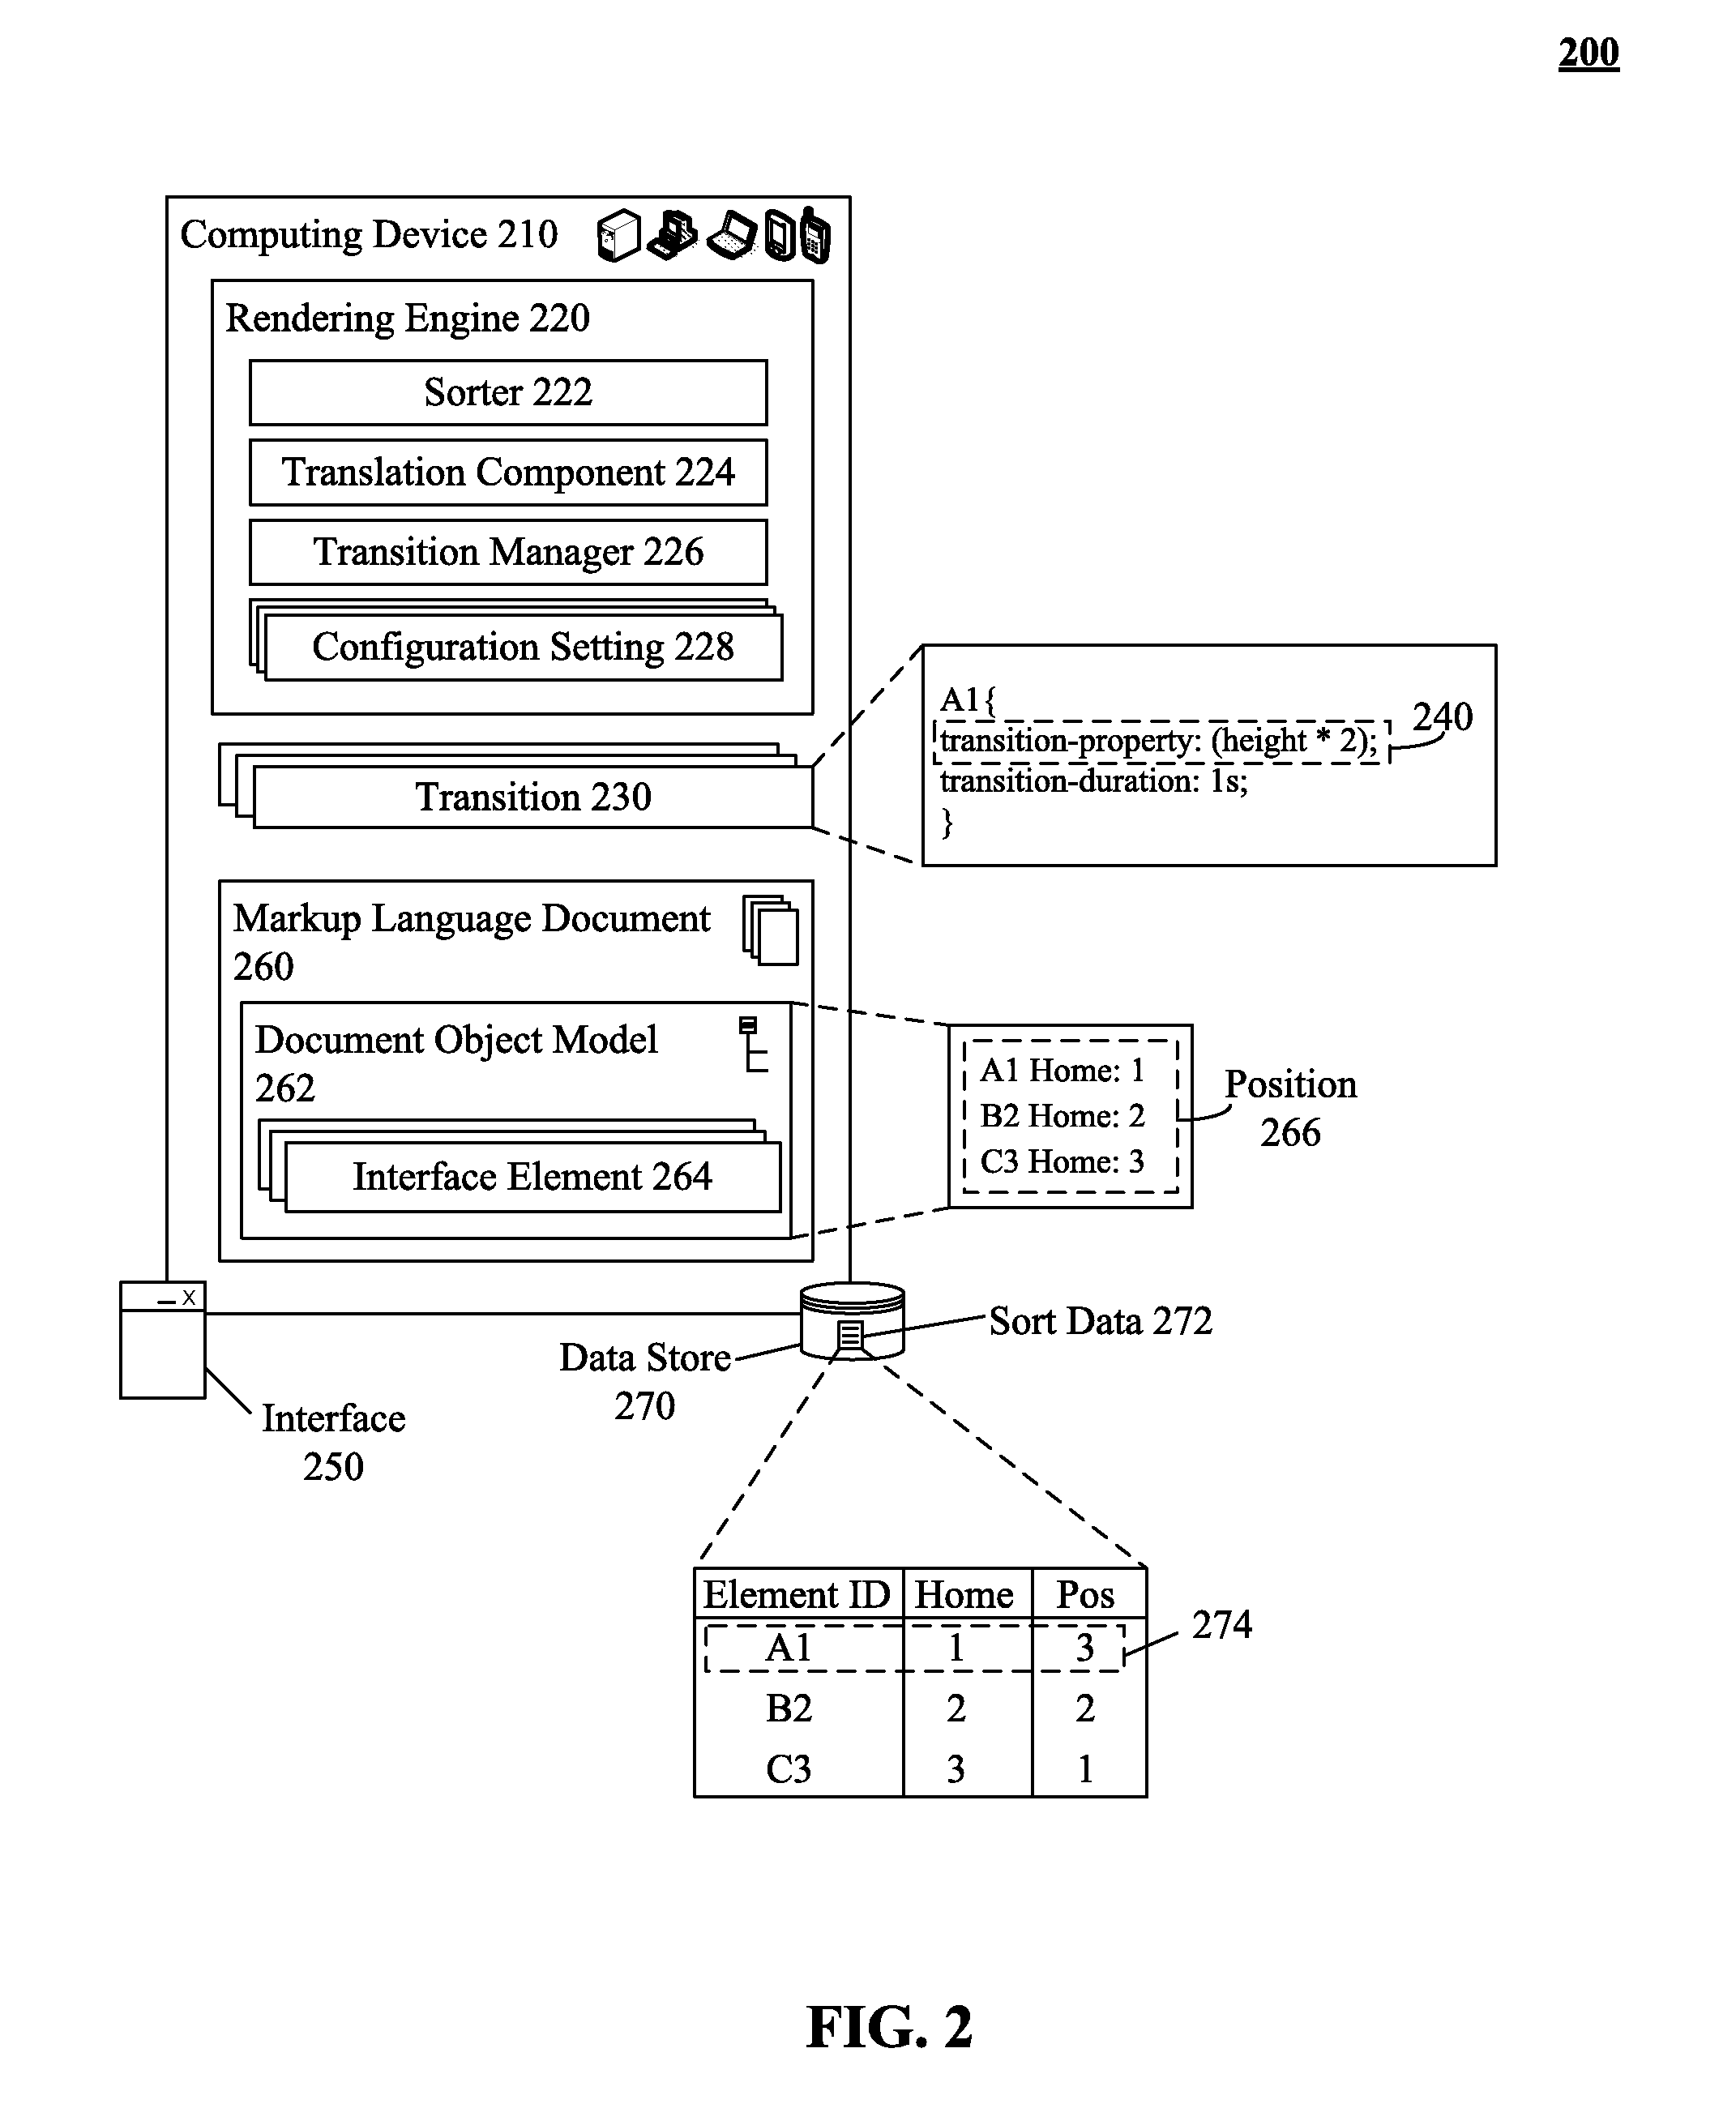 Utilizing a graphical transition to sort an interface element independently of a document object model